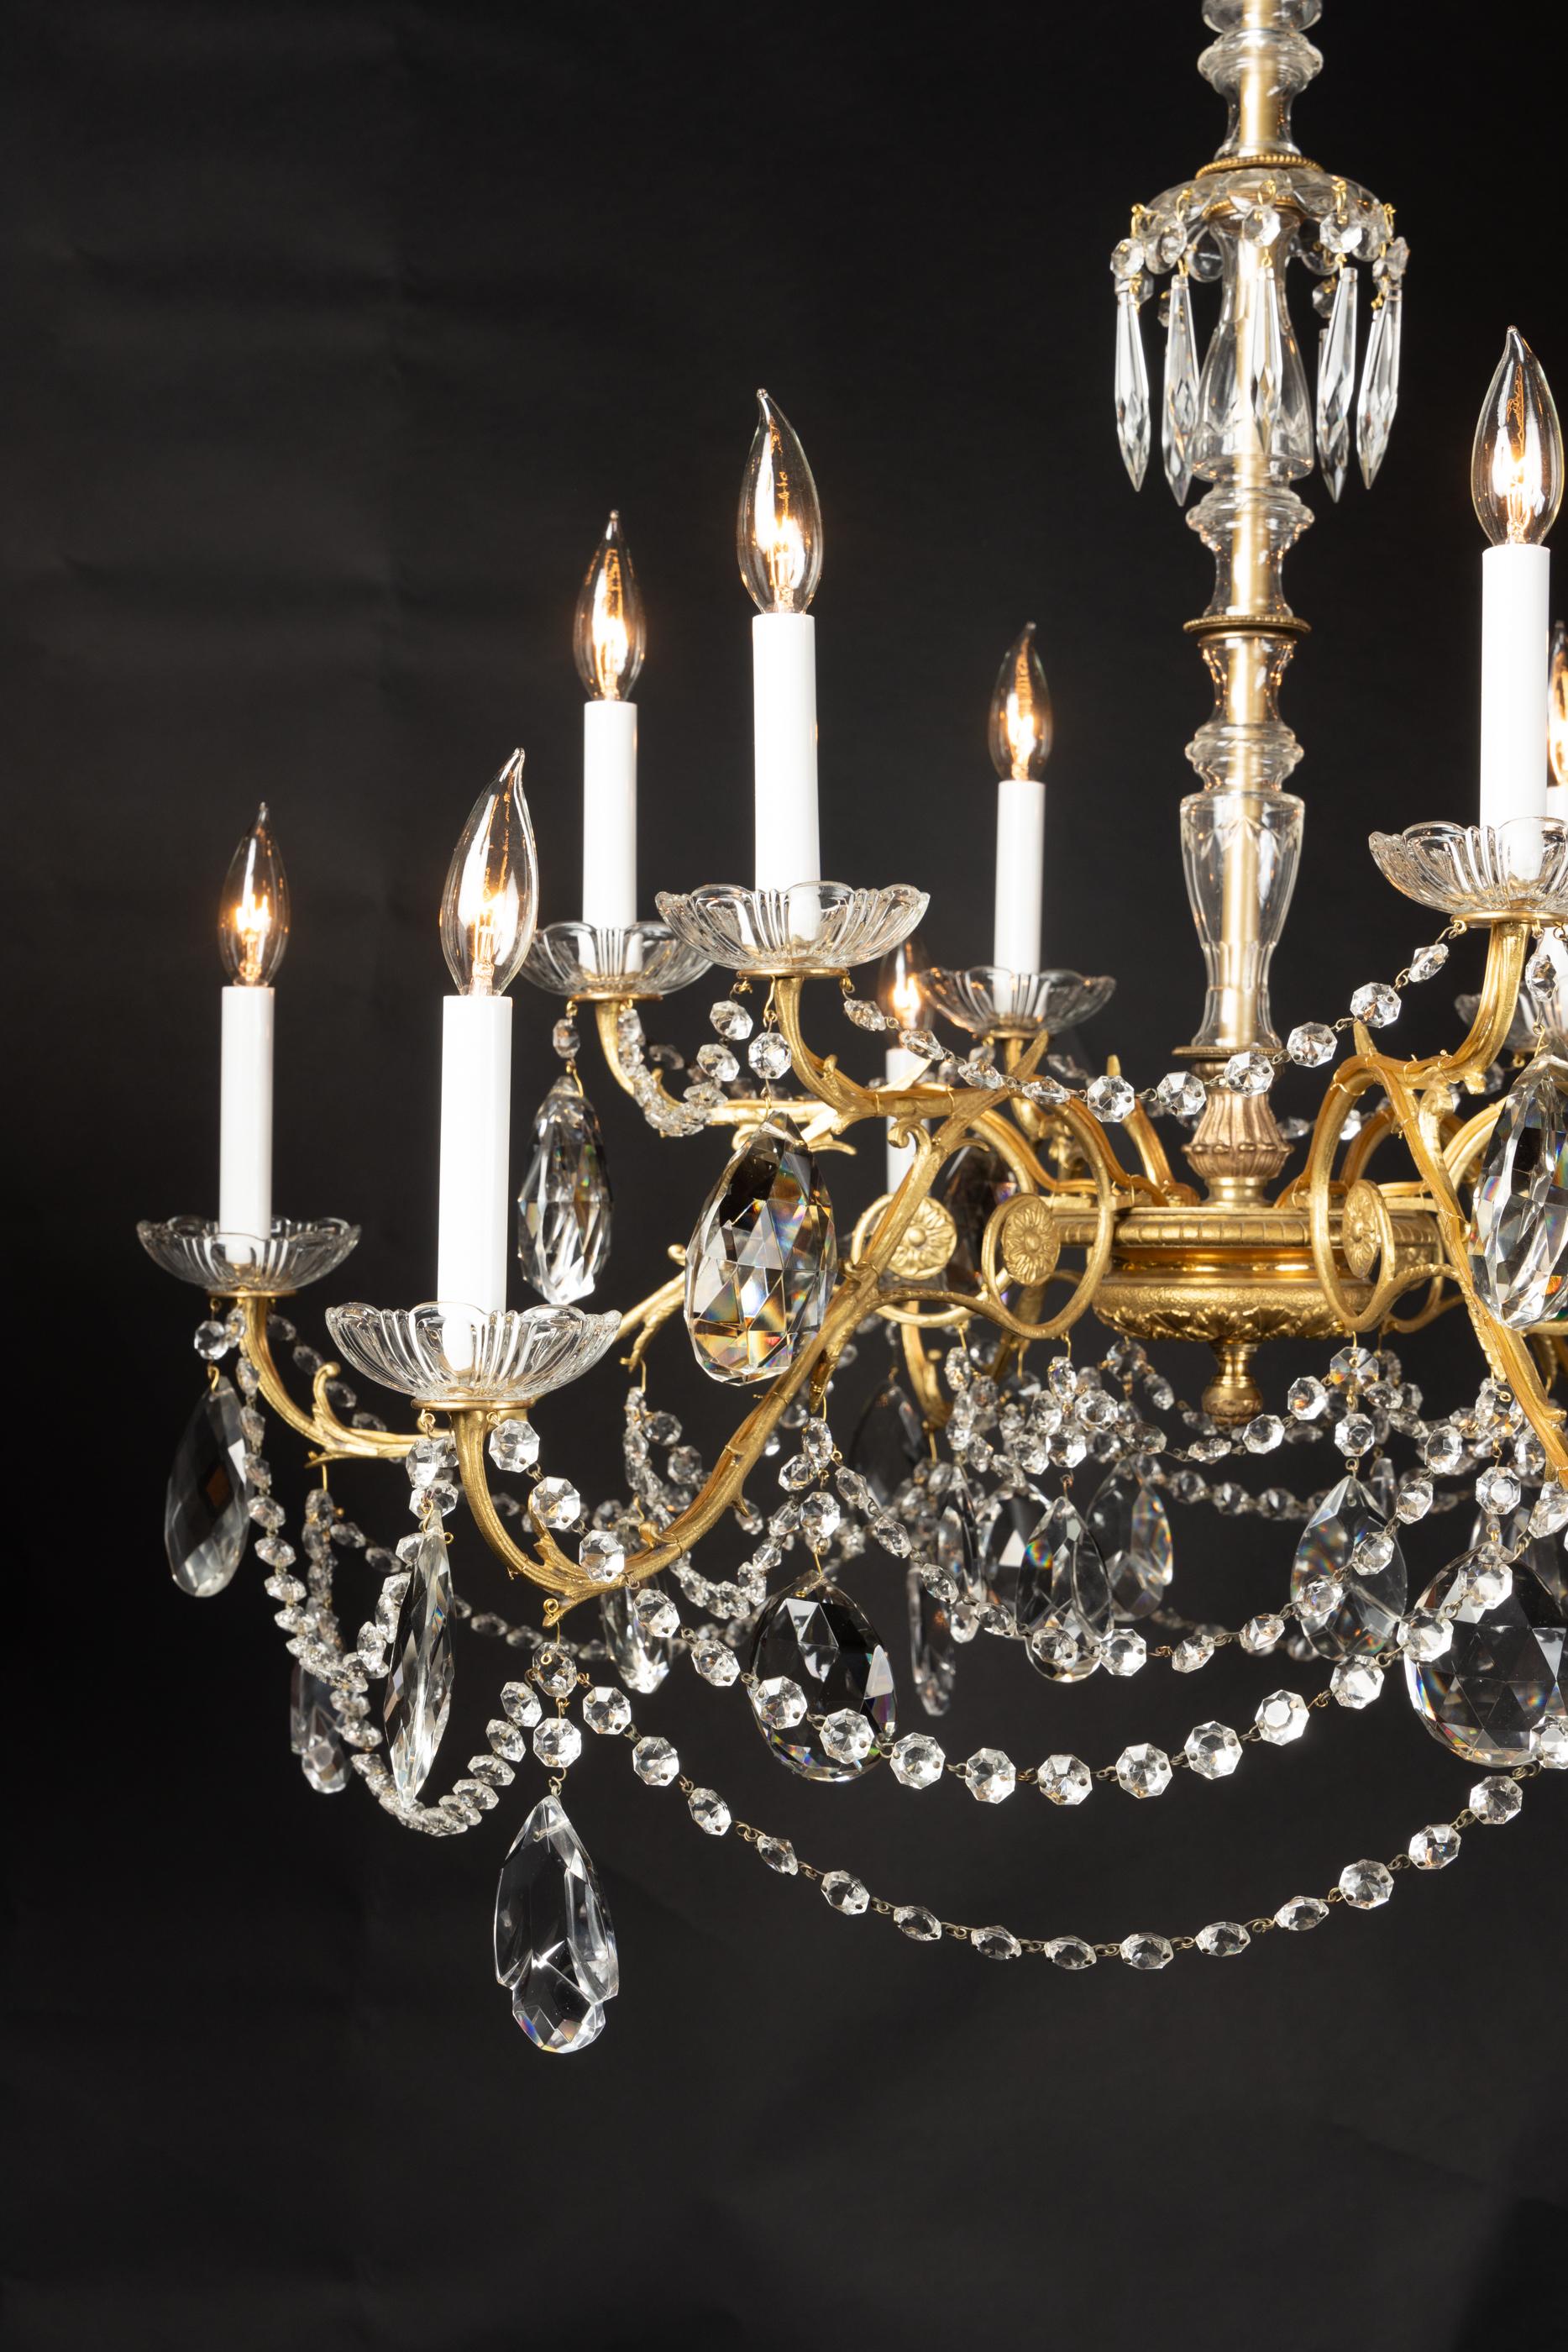 This classic Louis XVI chandelier dates back to the 19th century and features beautiful crystal surrounding the center stem. Ropes of octagonal crystal flows from the long bronze arms to give the chandelier beautiful negative space. This, combined